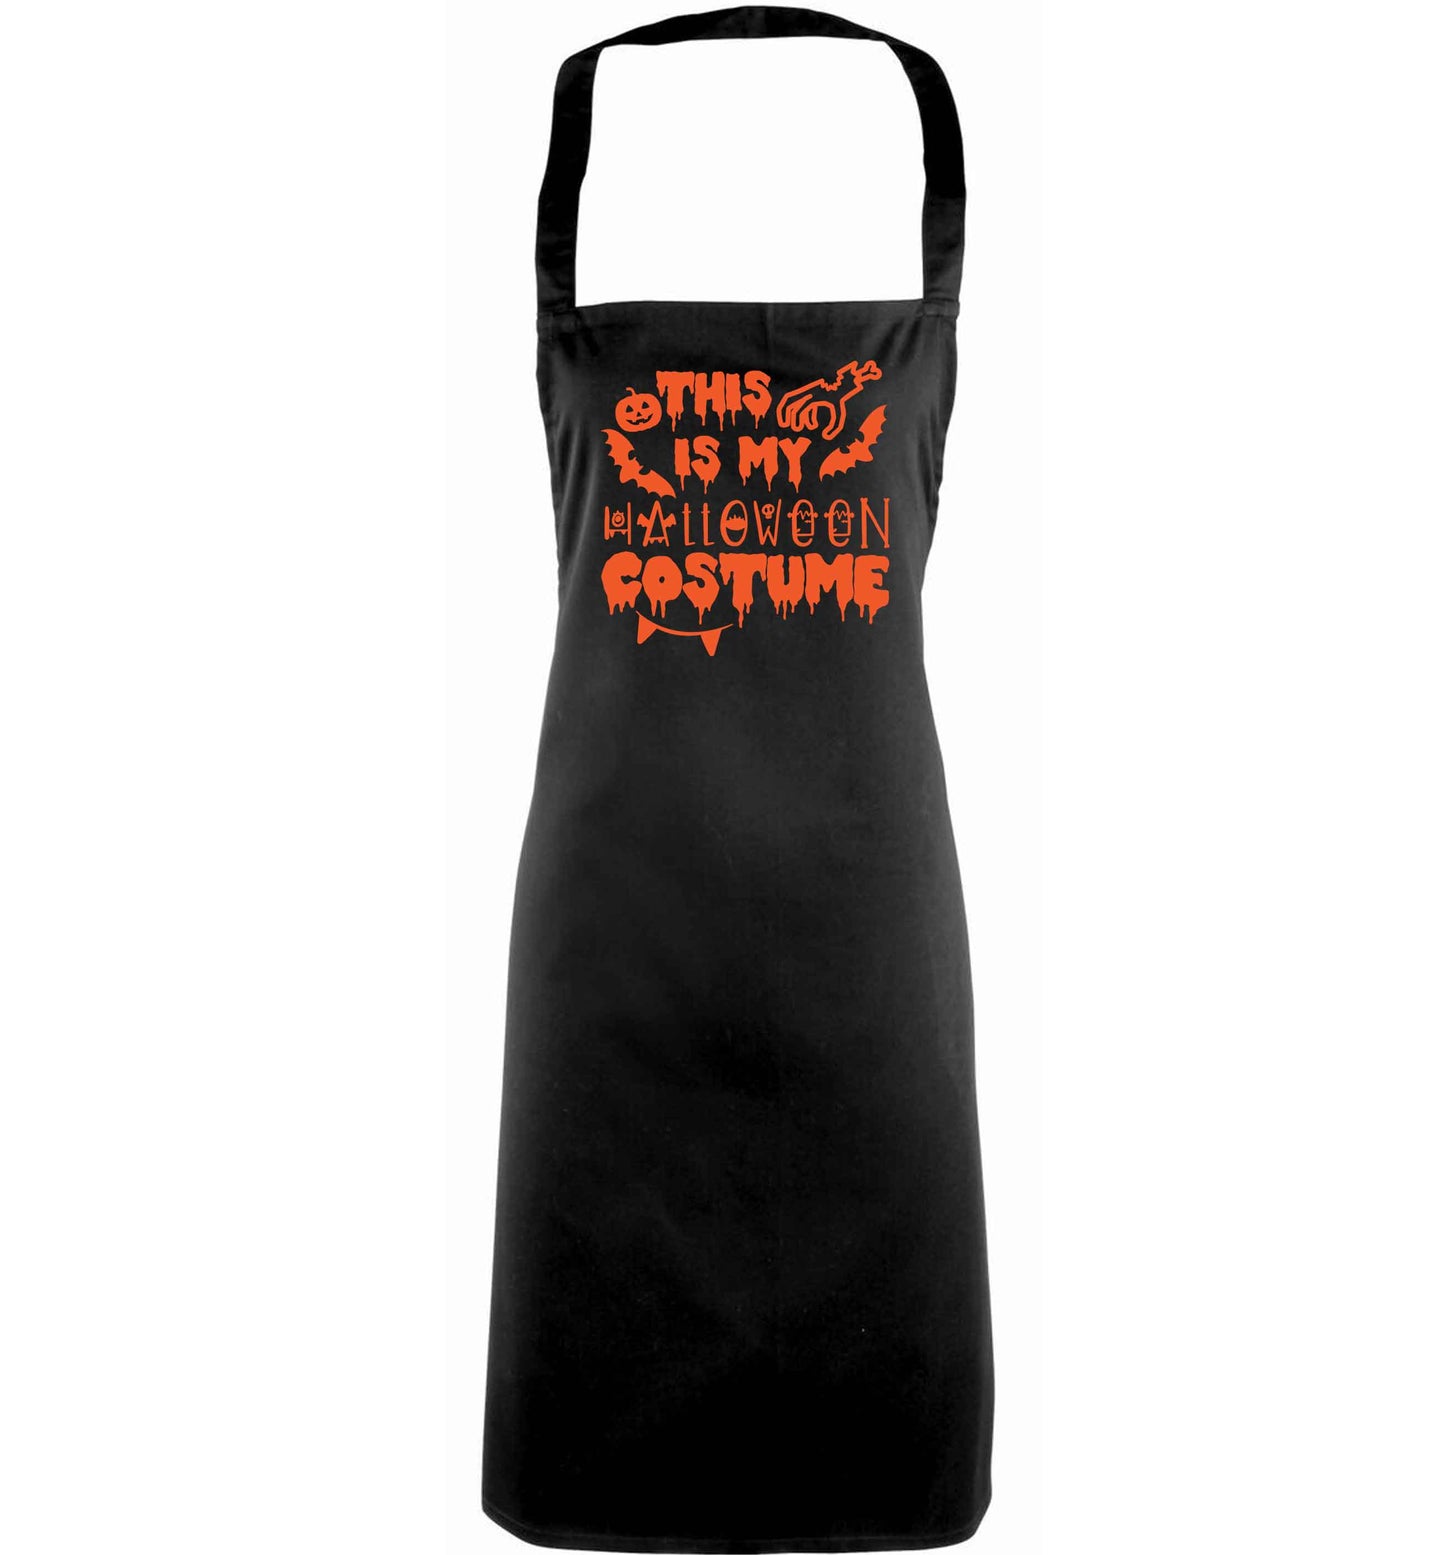 This is my halloween costume adults black apron